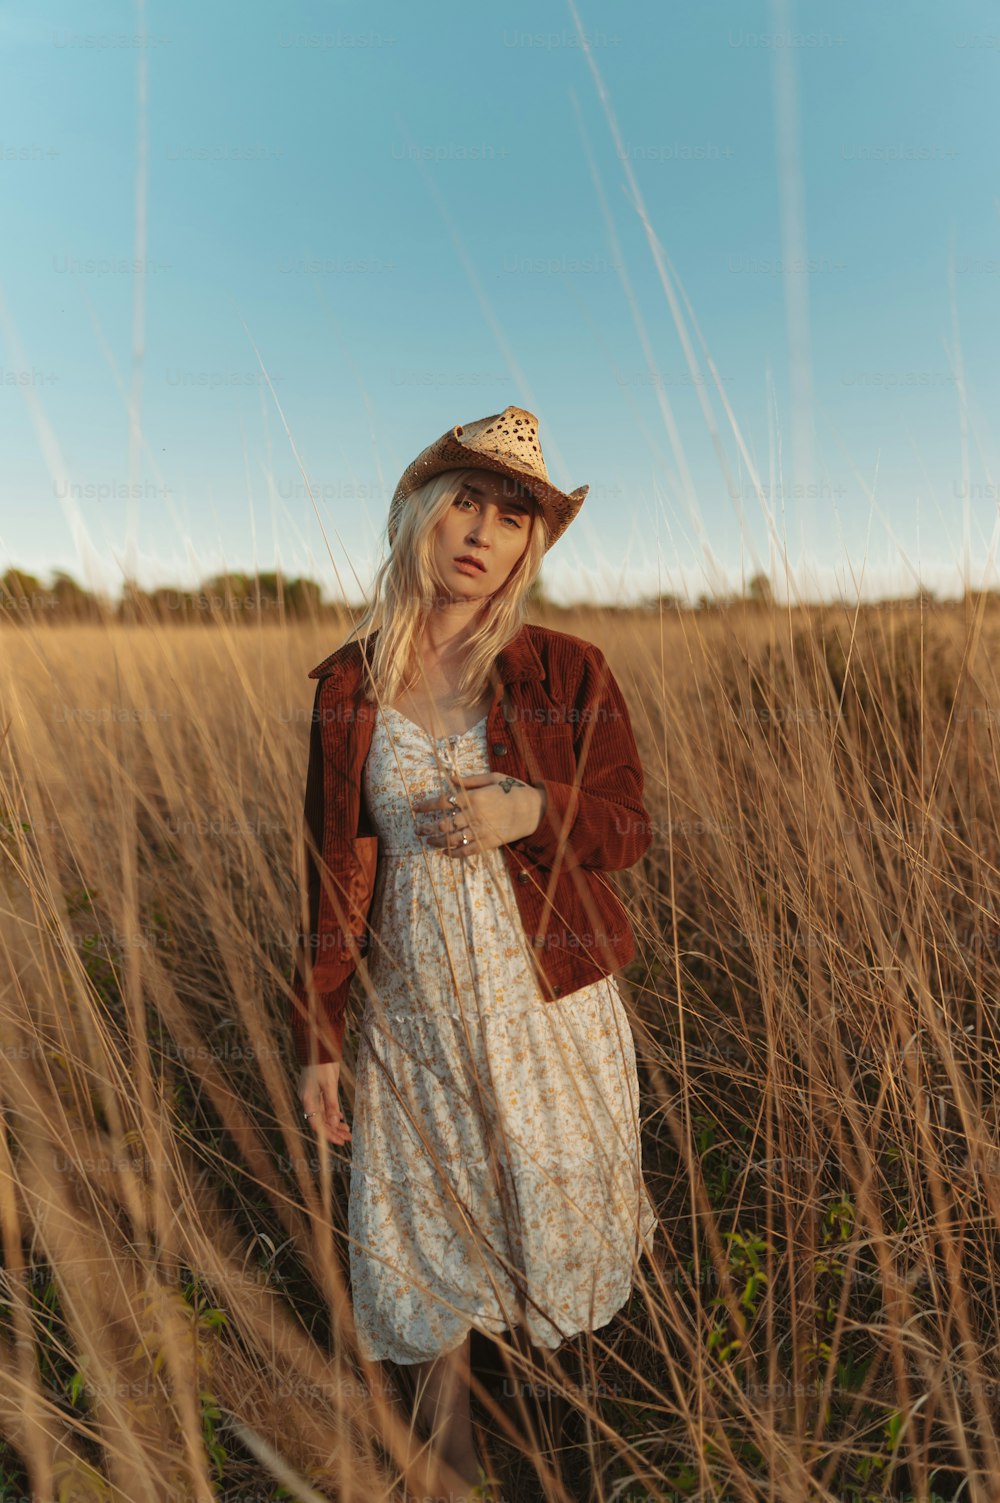 A woman sitting in a field of tall grass photo – Straw hat Image on Unsplash